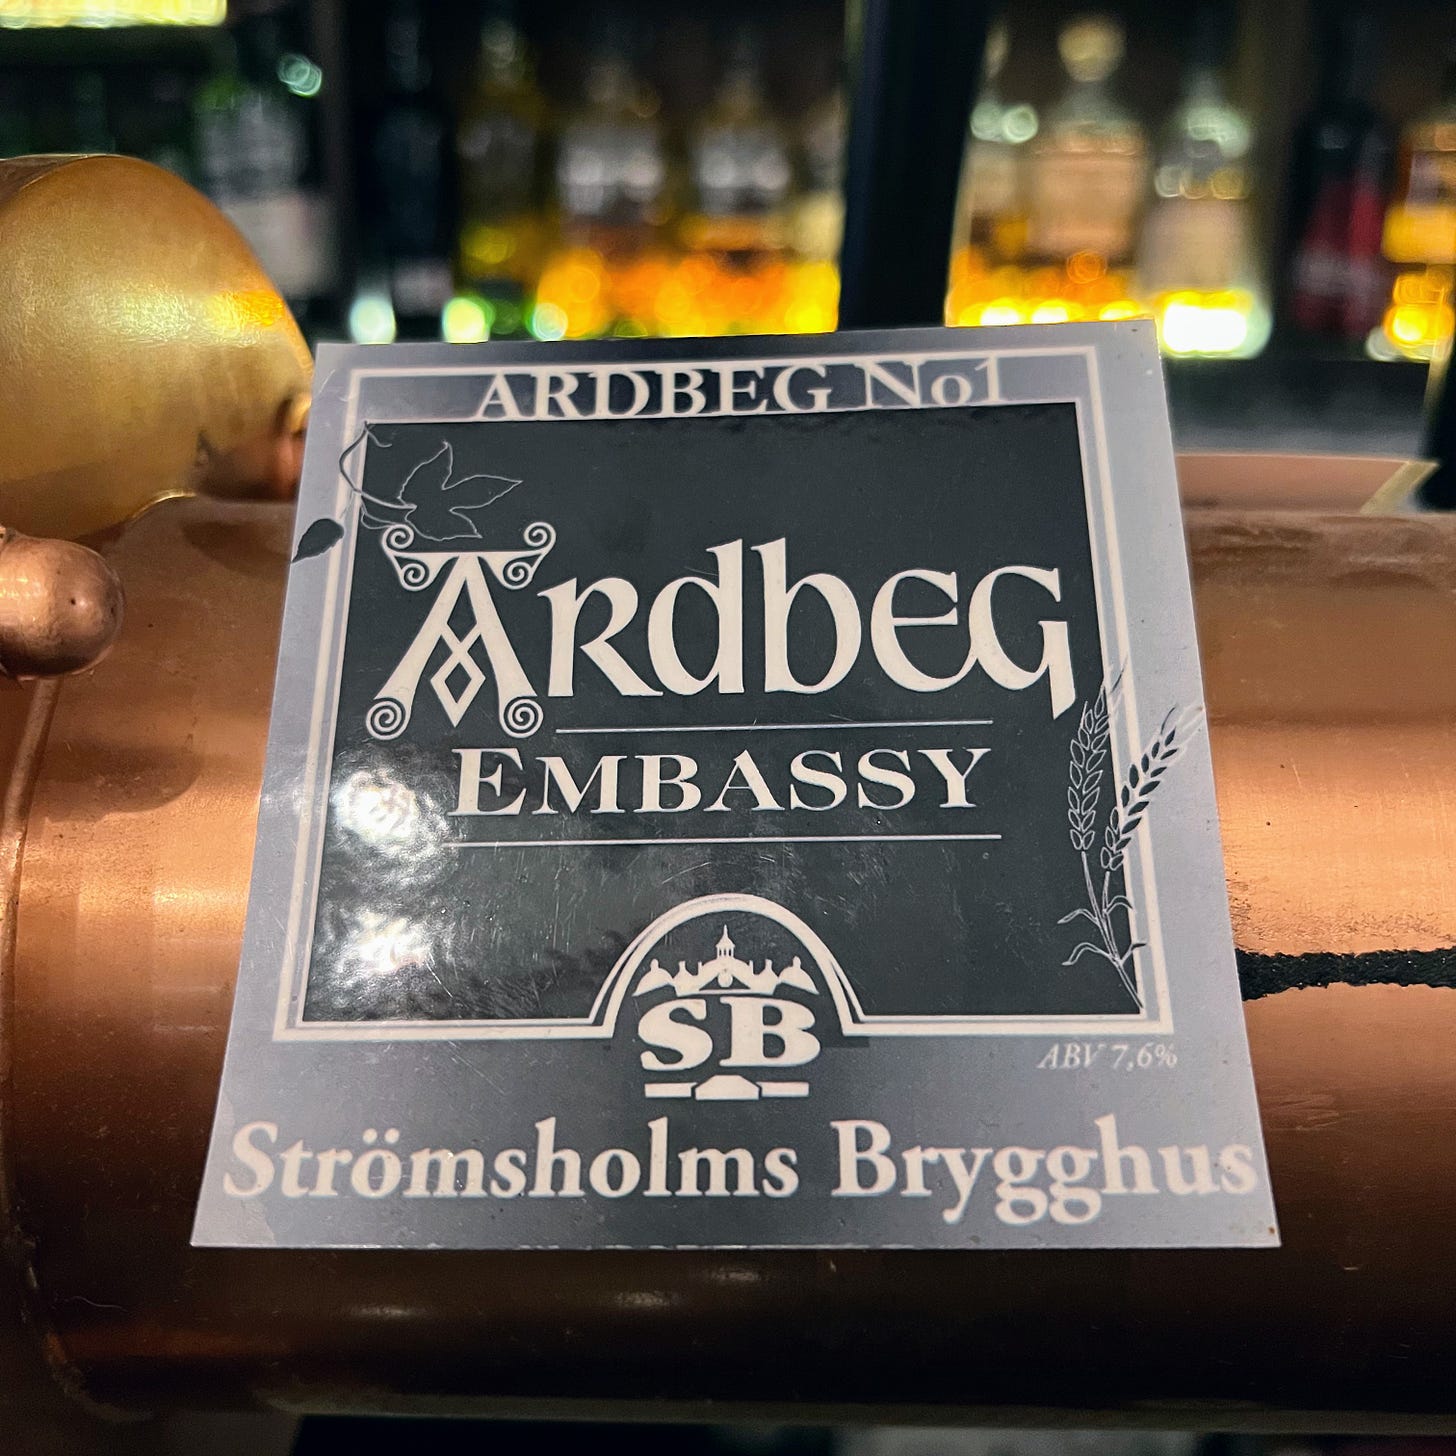 Sign for Ardbeg No 1 beer from the Ardbeg Embassy